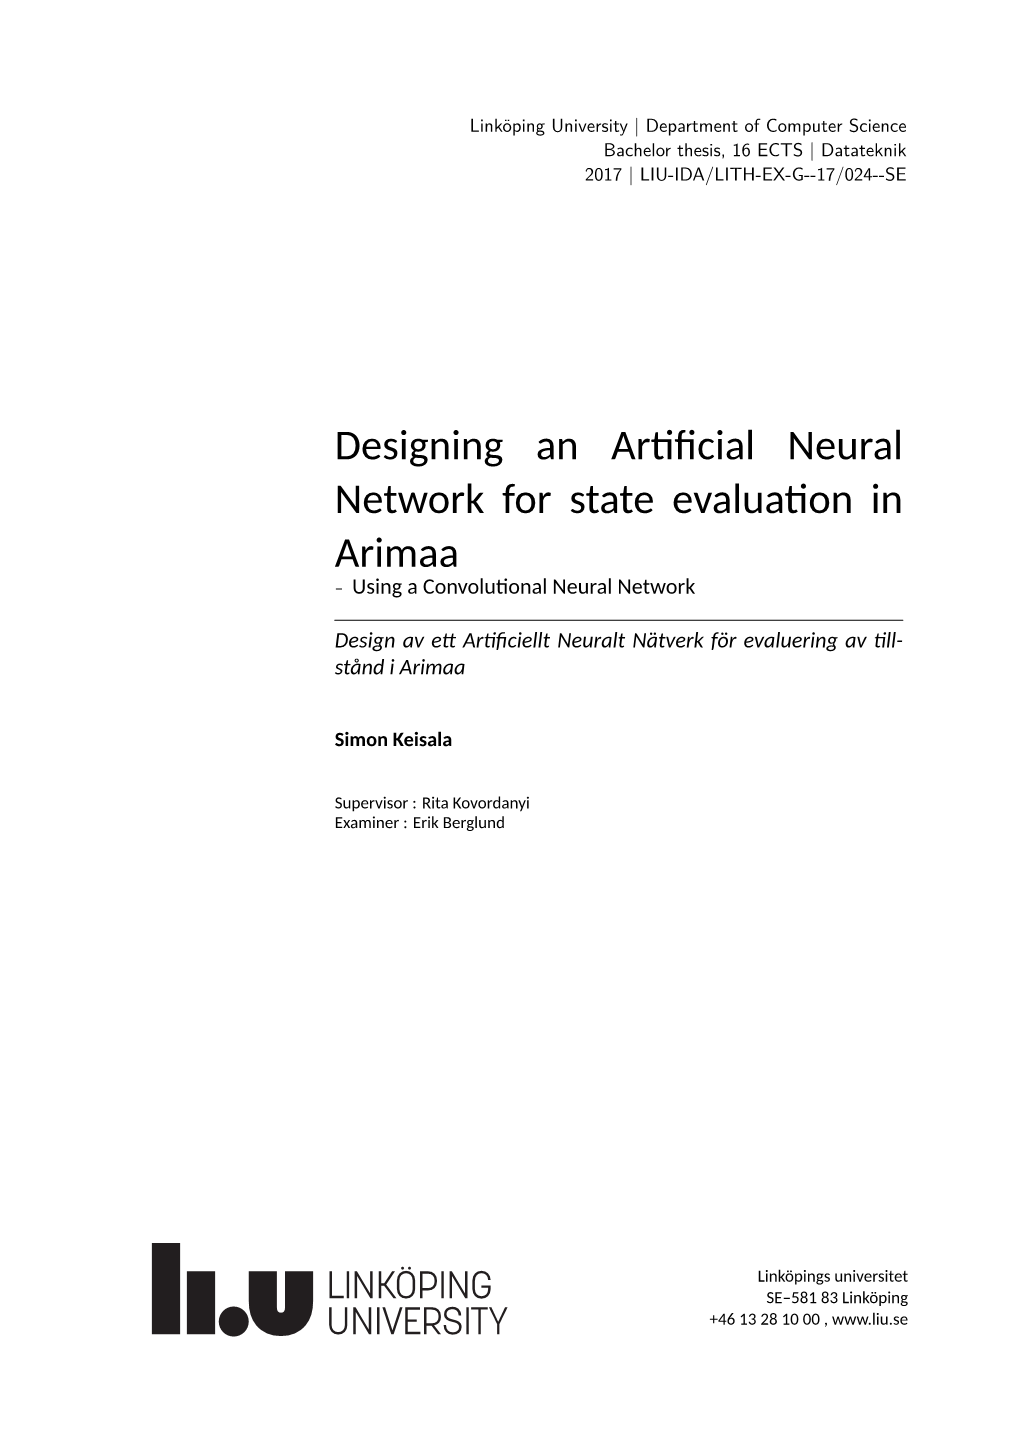 Designing an Ar Ficial Neural Network for State Evalua on in Arimaa